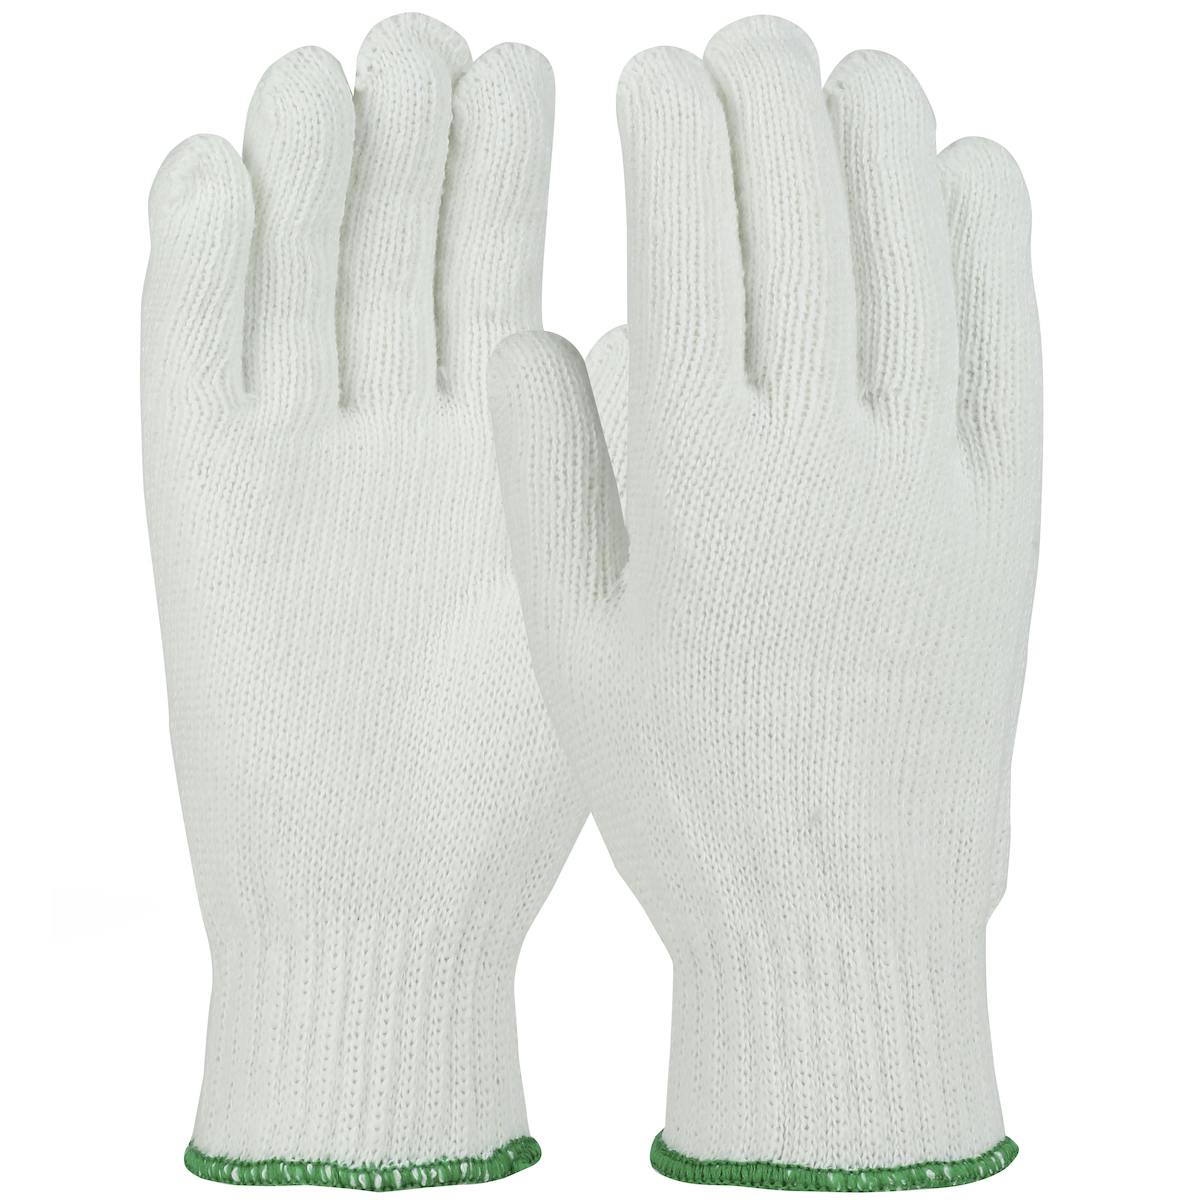 PIP® Seamless Knit Cotton and Polyester Glove - Heavy Weight (MP25)_0